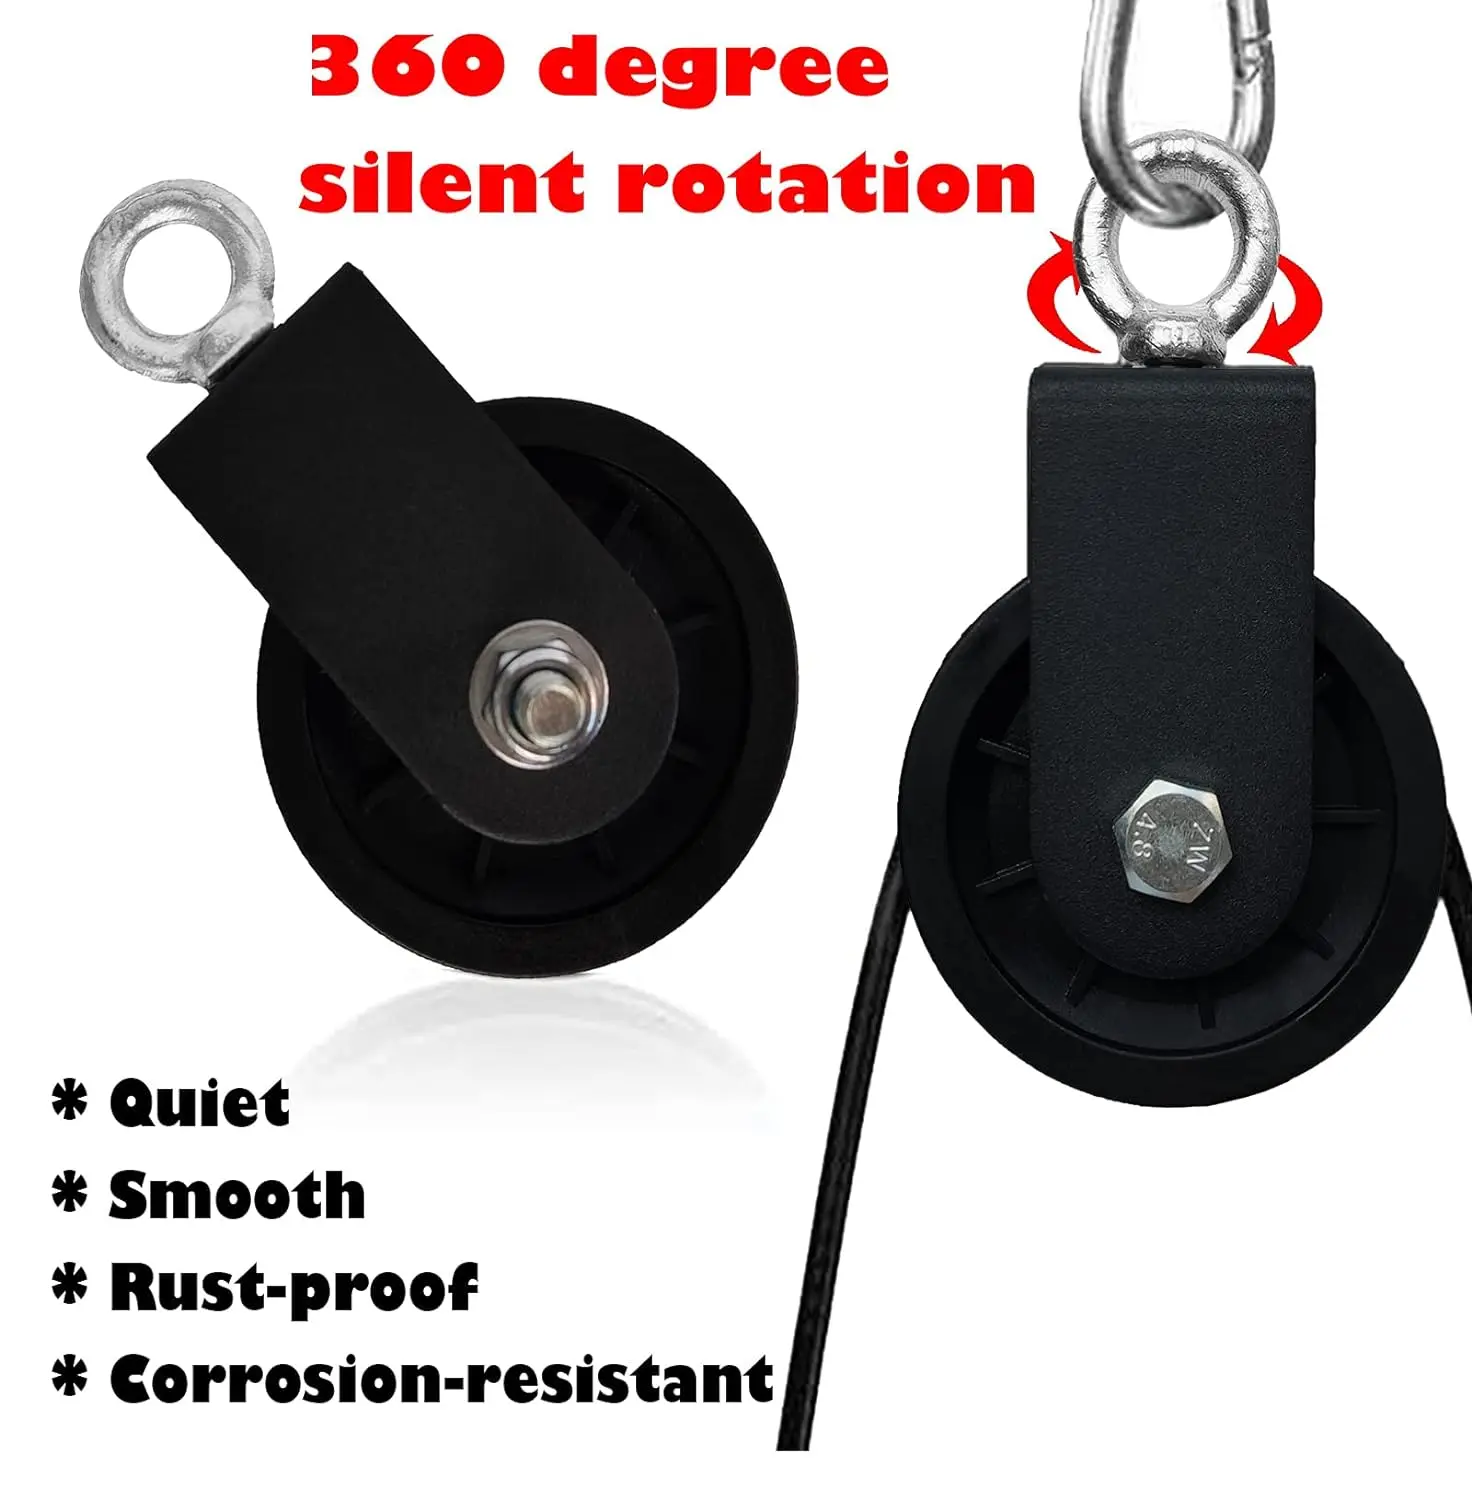 

360 Degree Rotation Silent Nylon Gym Cable Pulley with Hanging Straps and Carabiner LAT Pulley System DIY Attachment Accessories